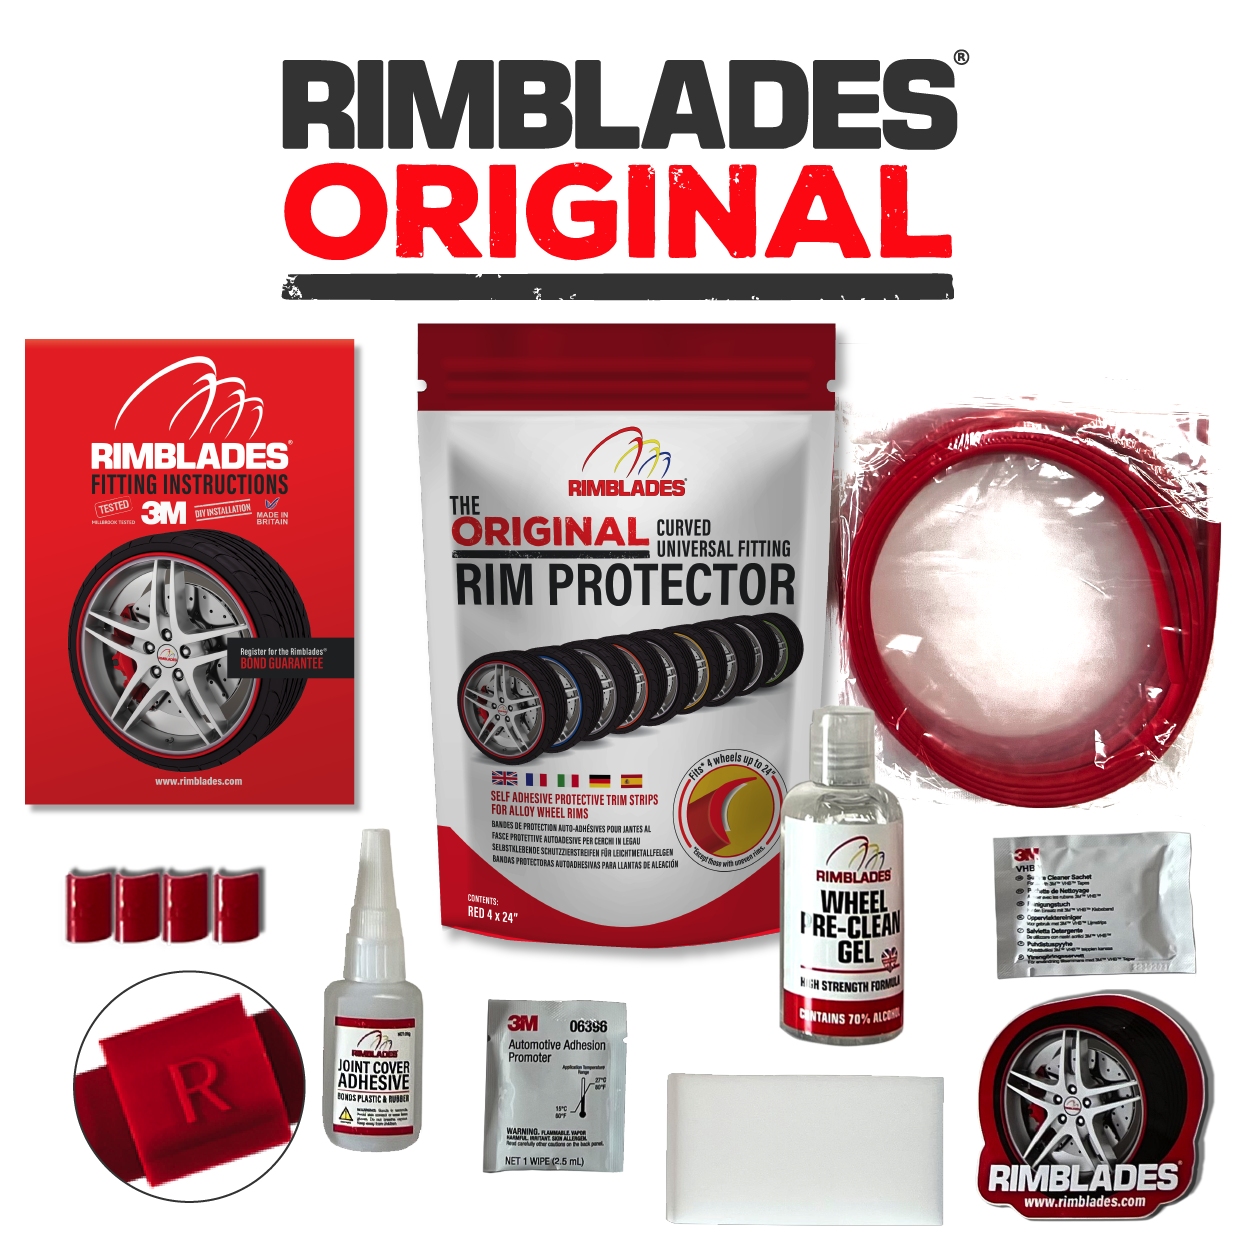 RimBlades Alloy Wheel Guards - Protect Your Rims In Style